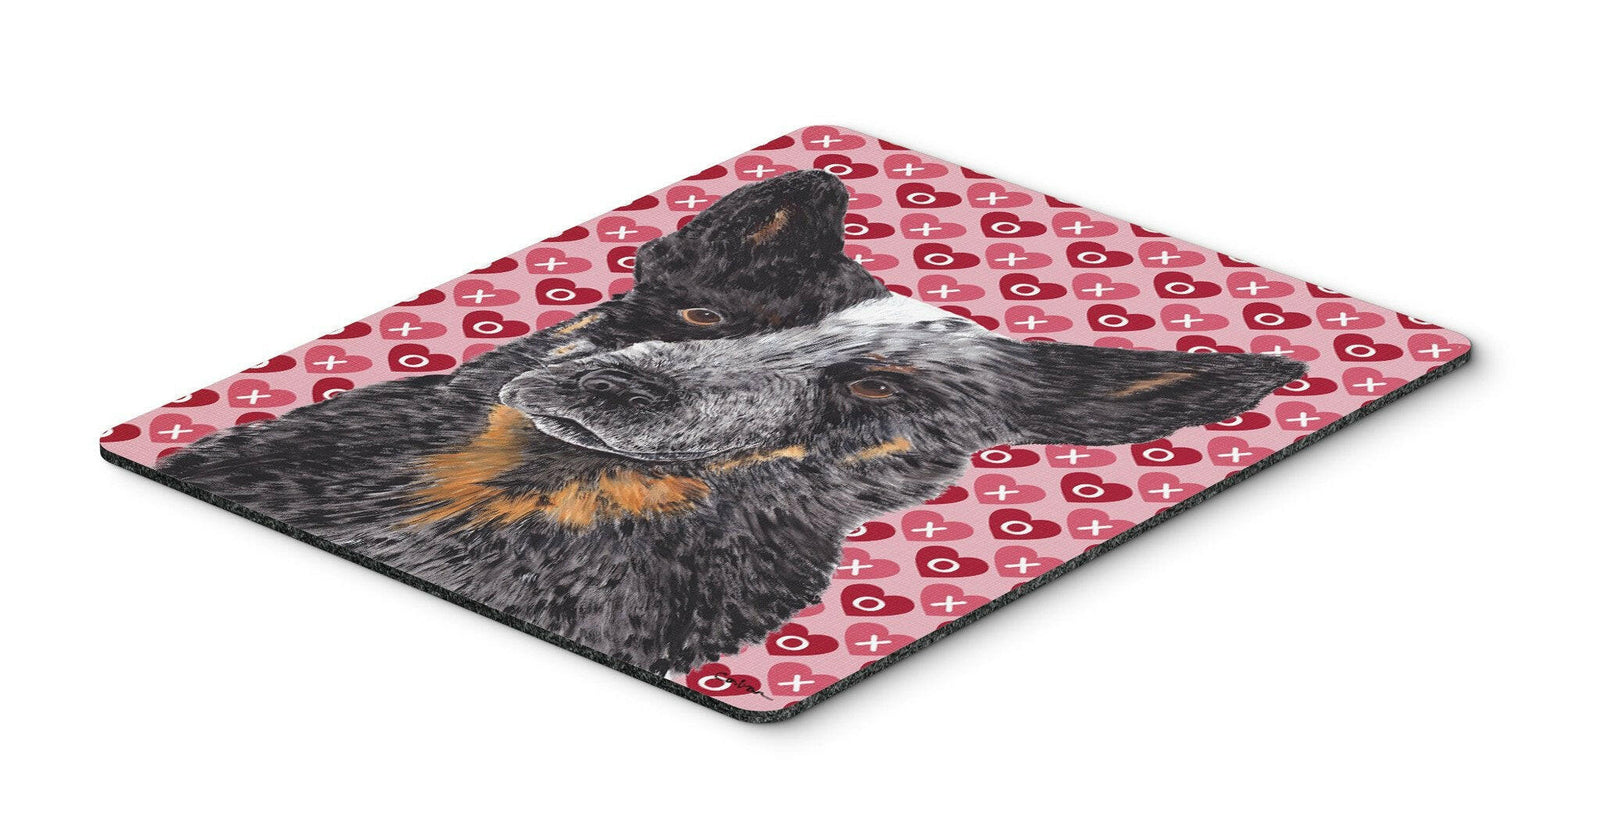 Australian Cattle Dog Hearts Love Valentine's Day Mouse Pad, Hot Pad or Trivet by Caroline's Treasures